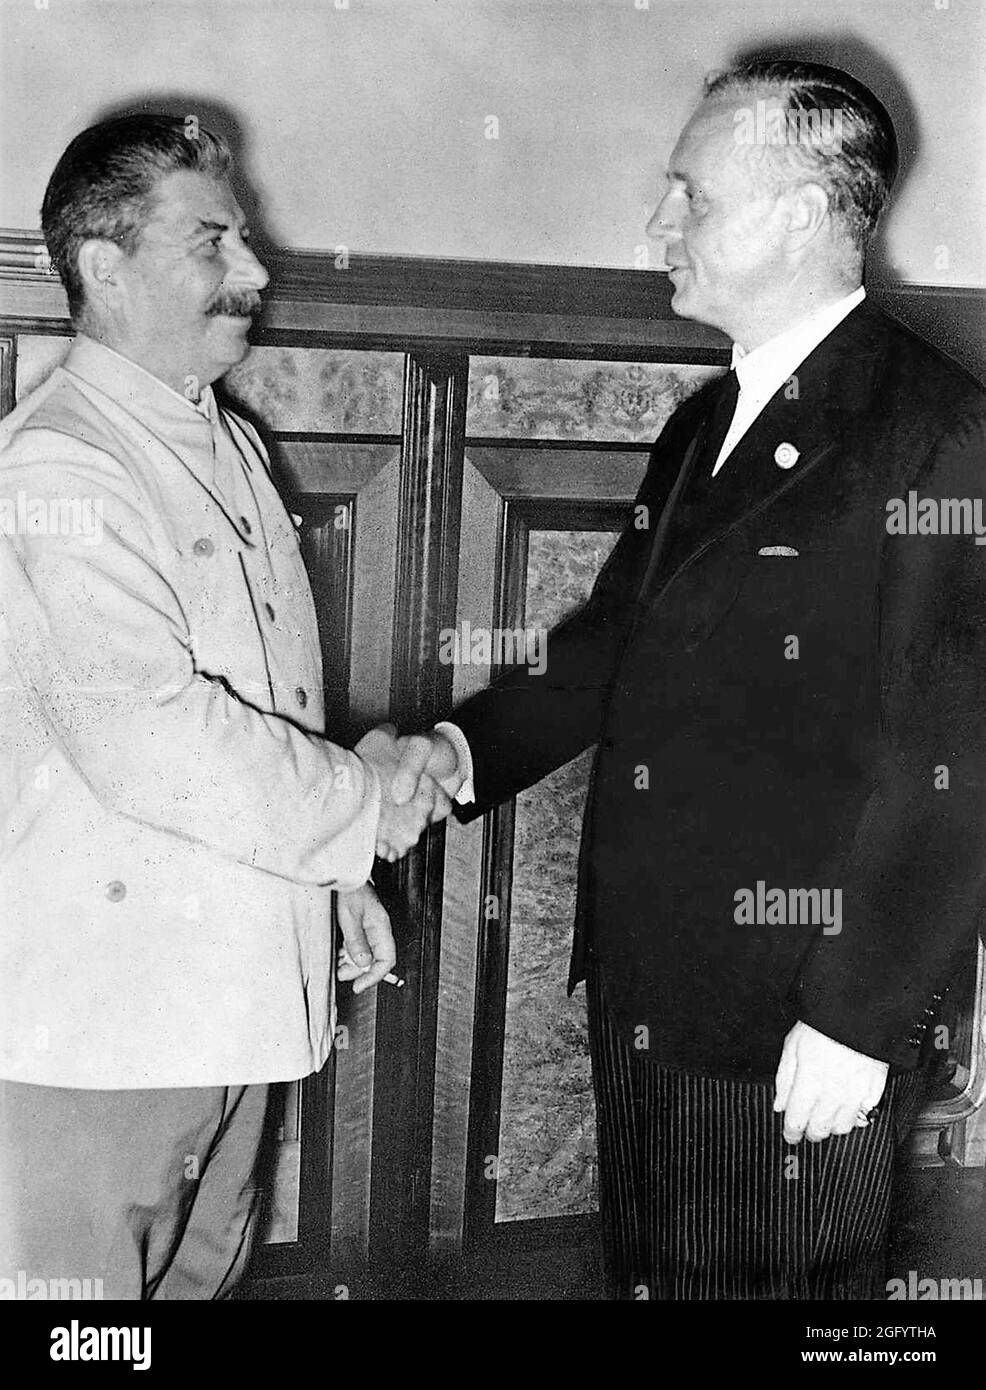 Joseph Stalin and German Foreign Minister Joachim von Ribbentrop shaking hands after signing the Friendship and Border Treaty between the USSR and Germany (aka the Nazi-Soviet Pact or the Molotov-Ribbentrop Pact) Stock Photo